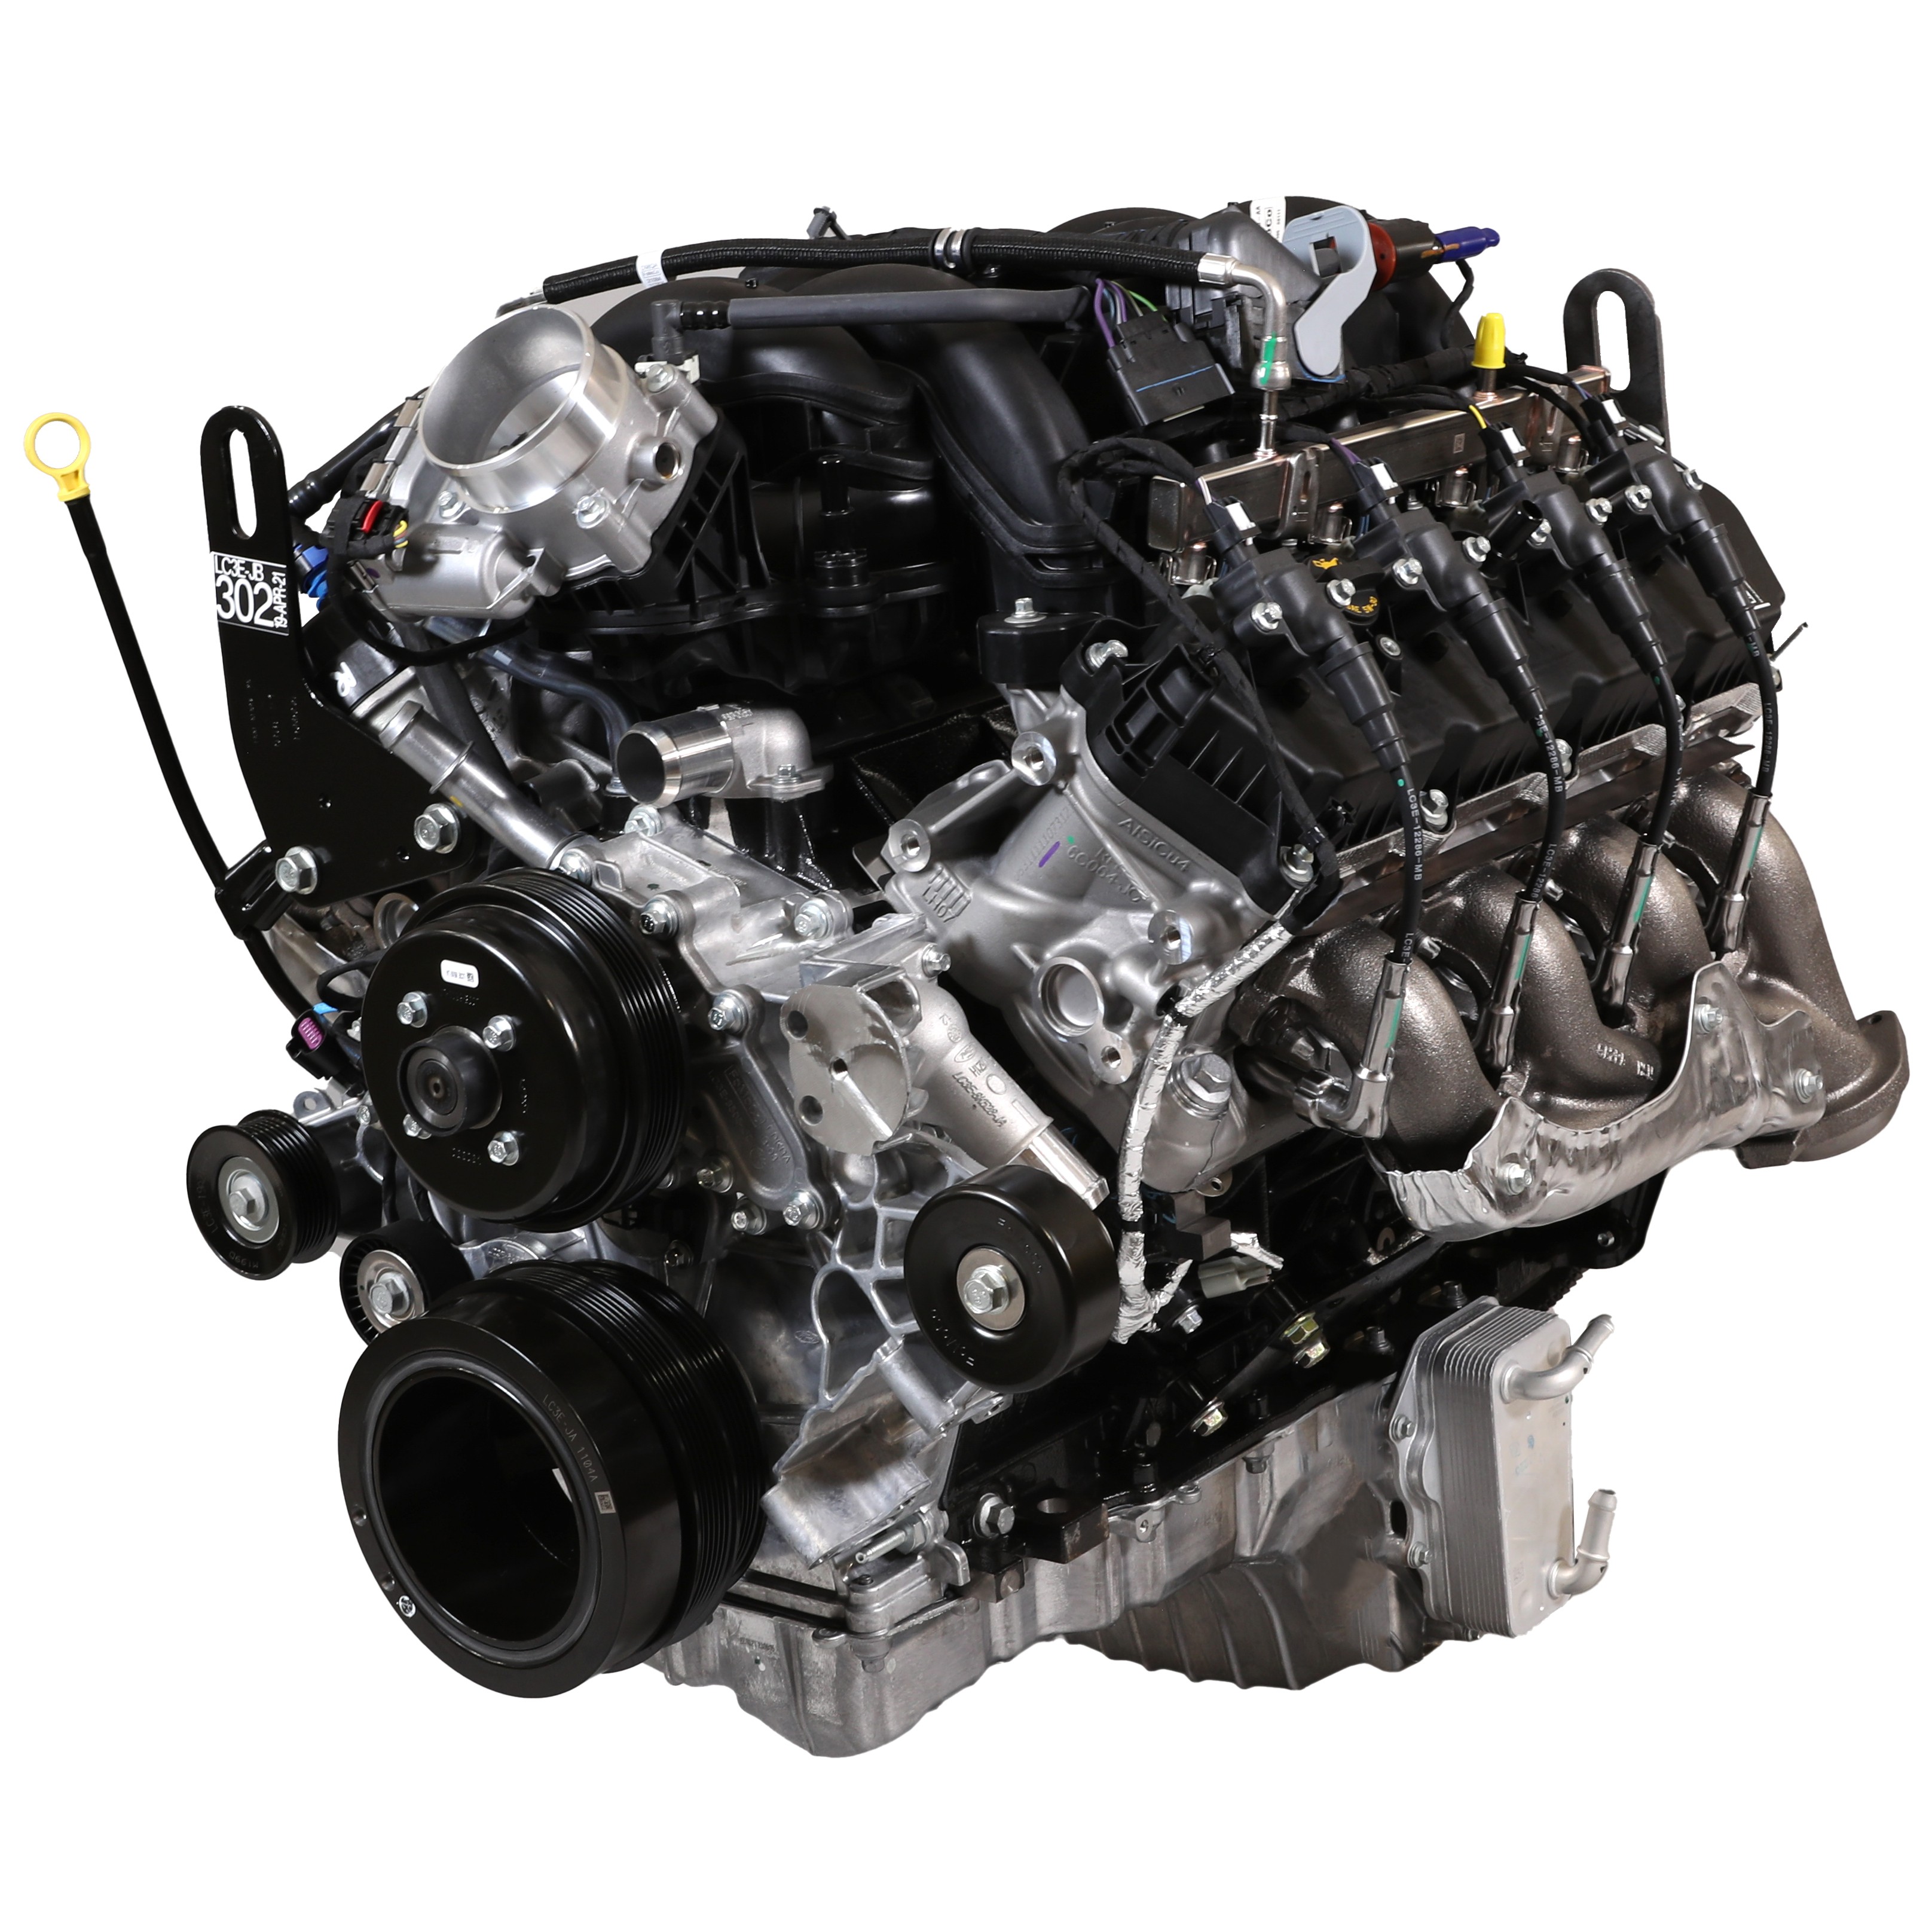 Engine Overview: The Ford 7.3L 